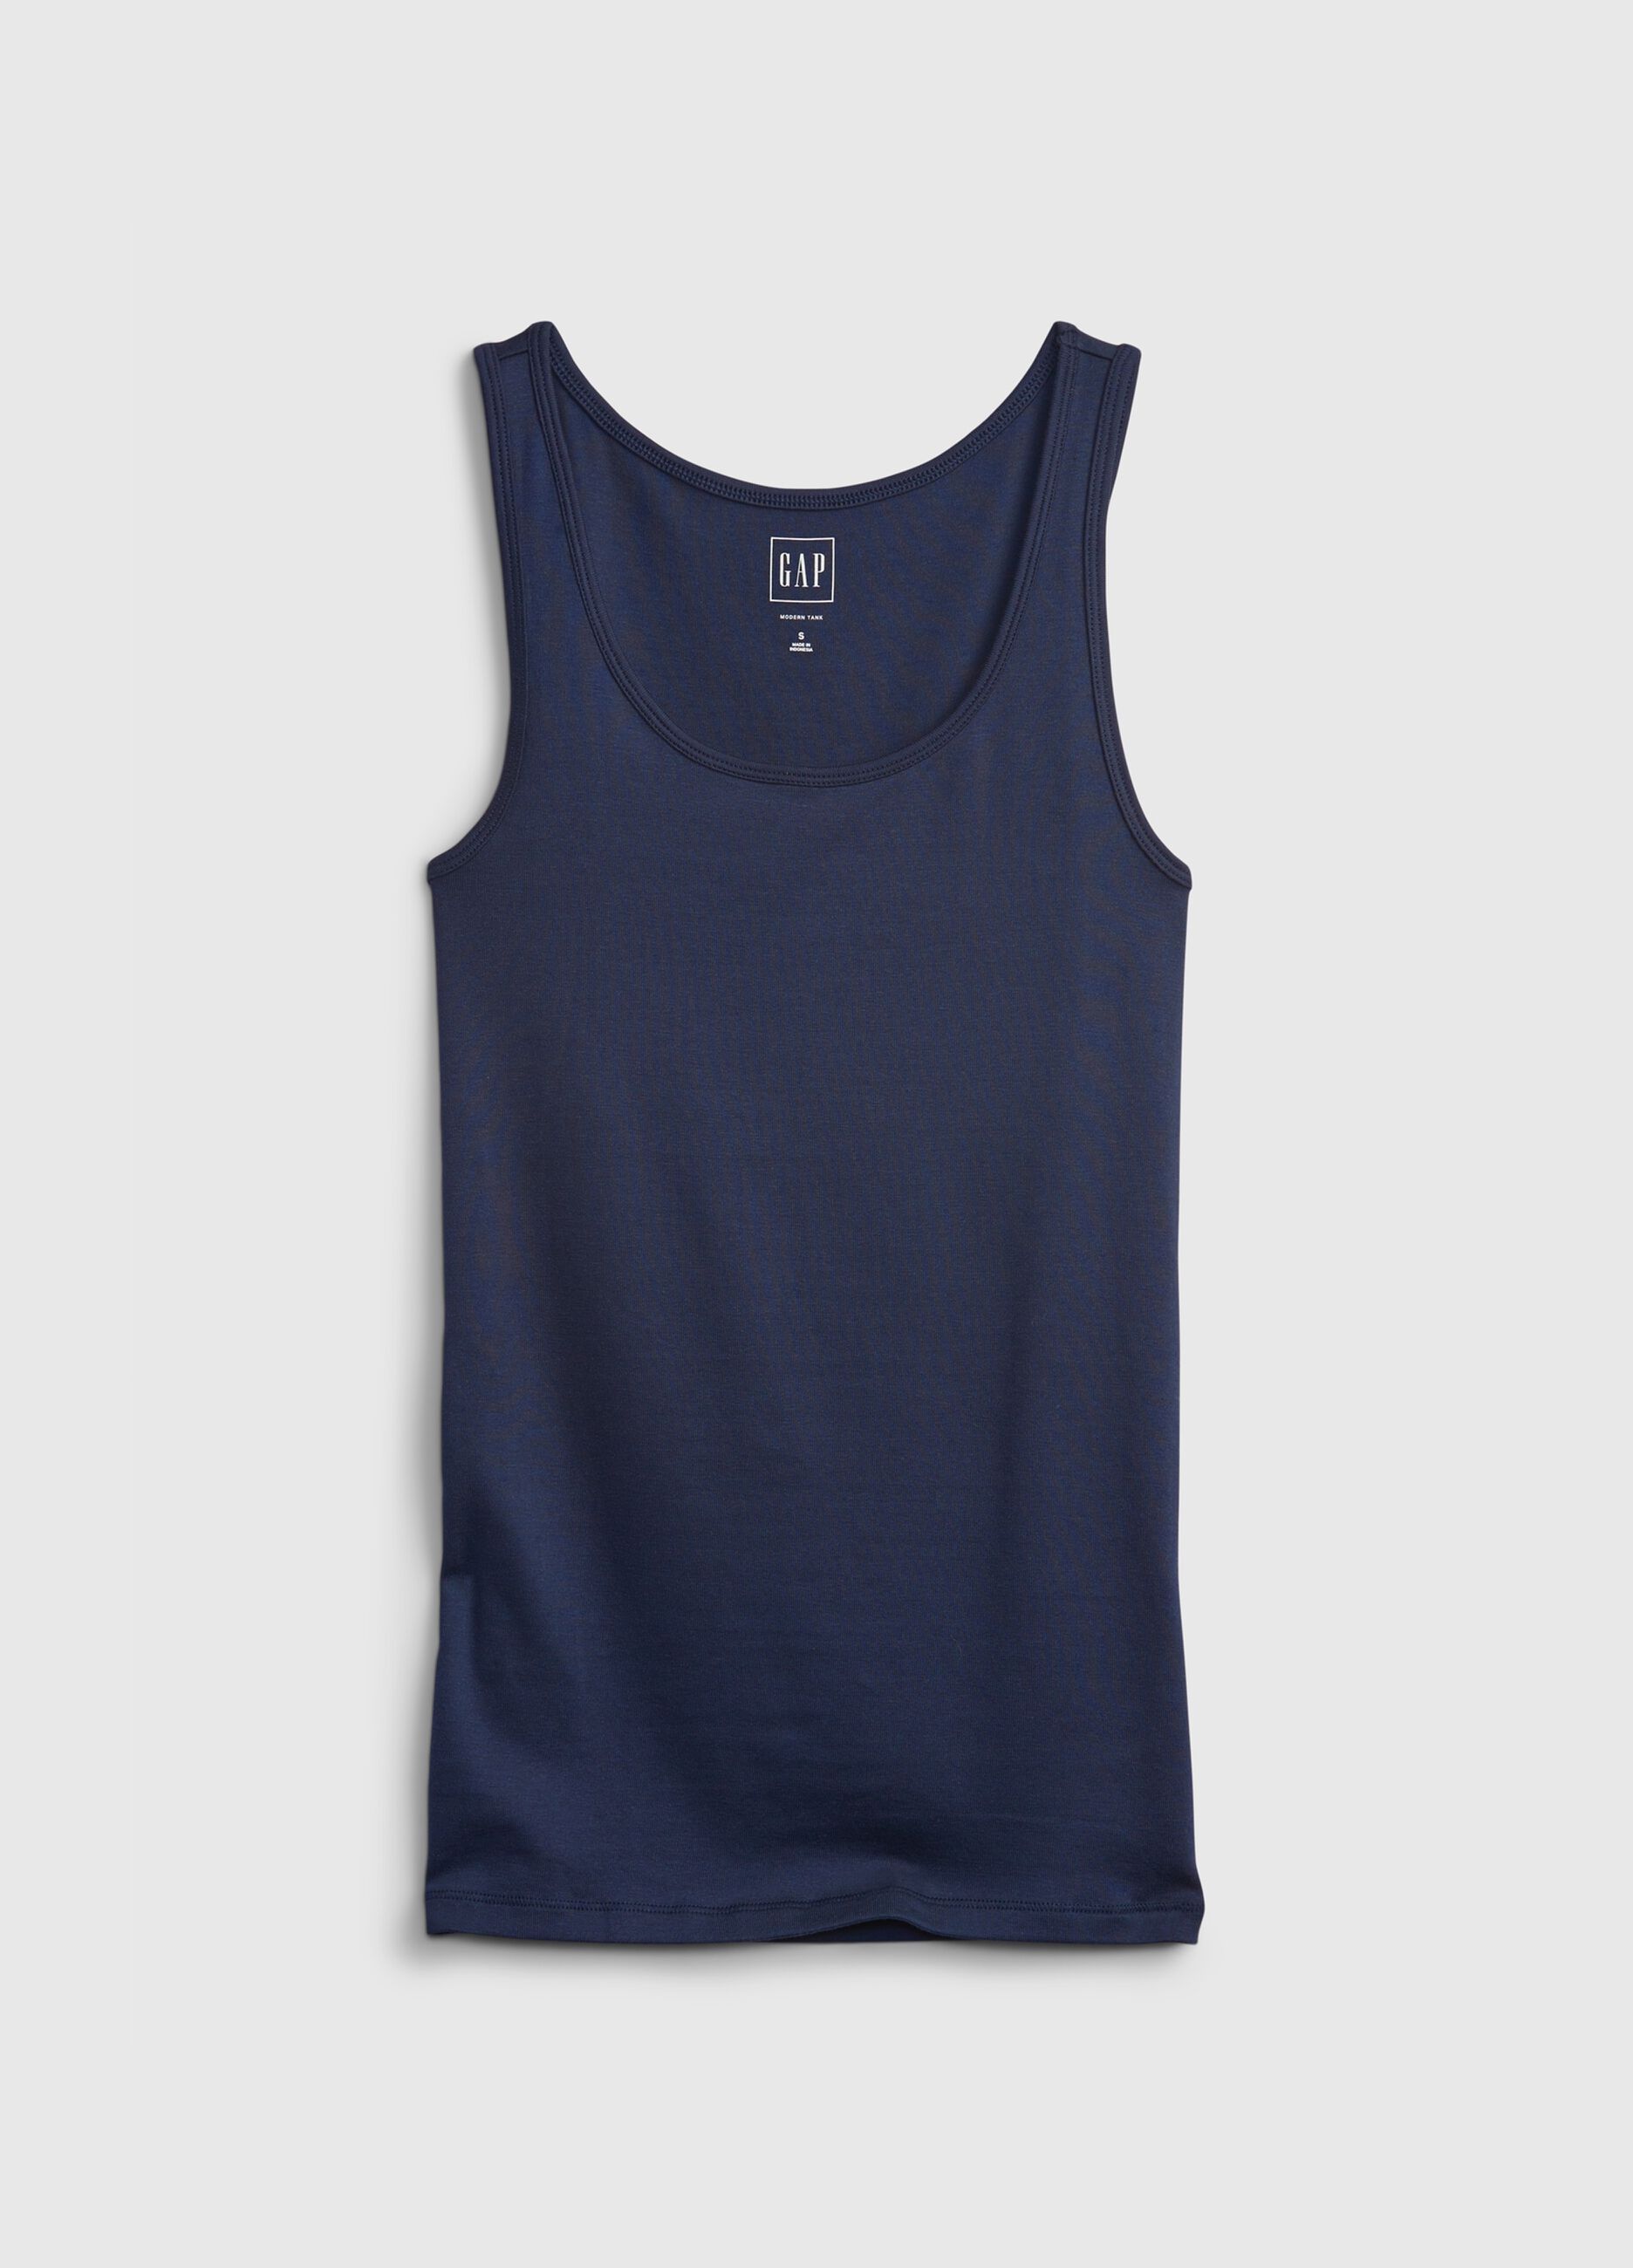 Tank top in cotton and modal._3